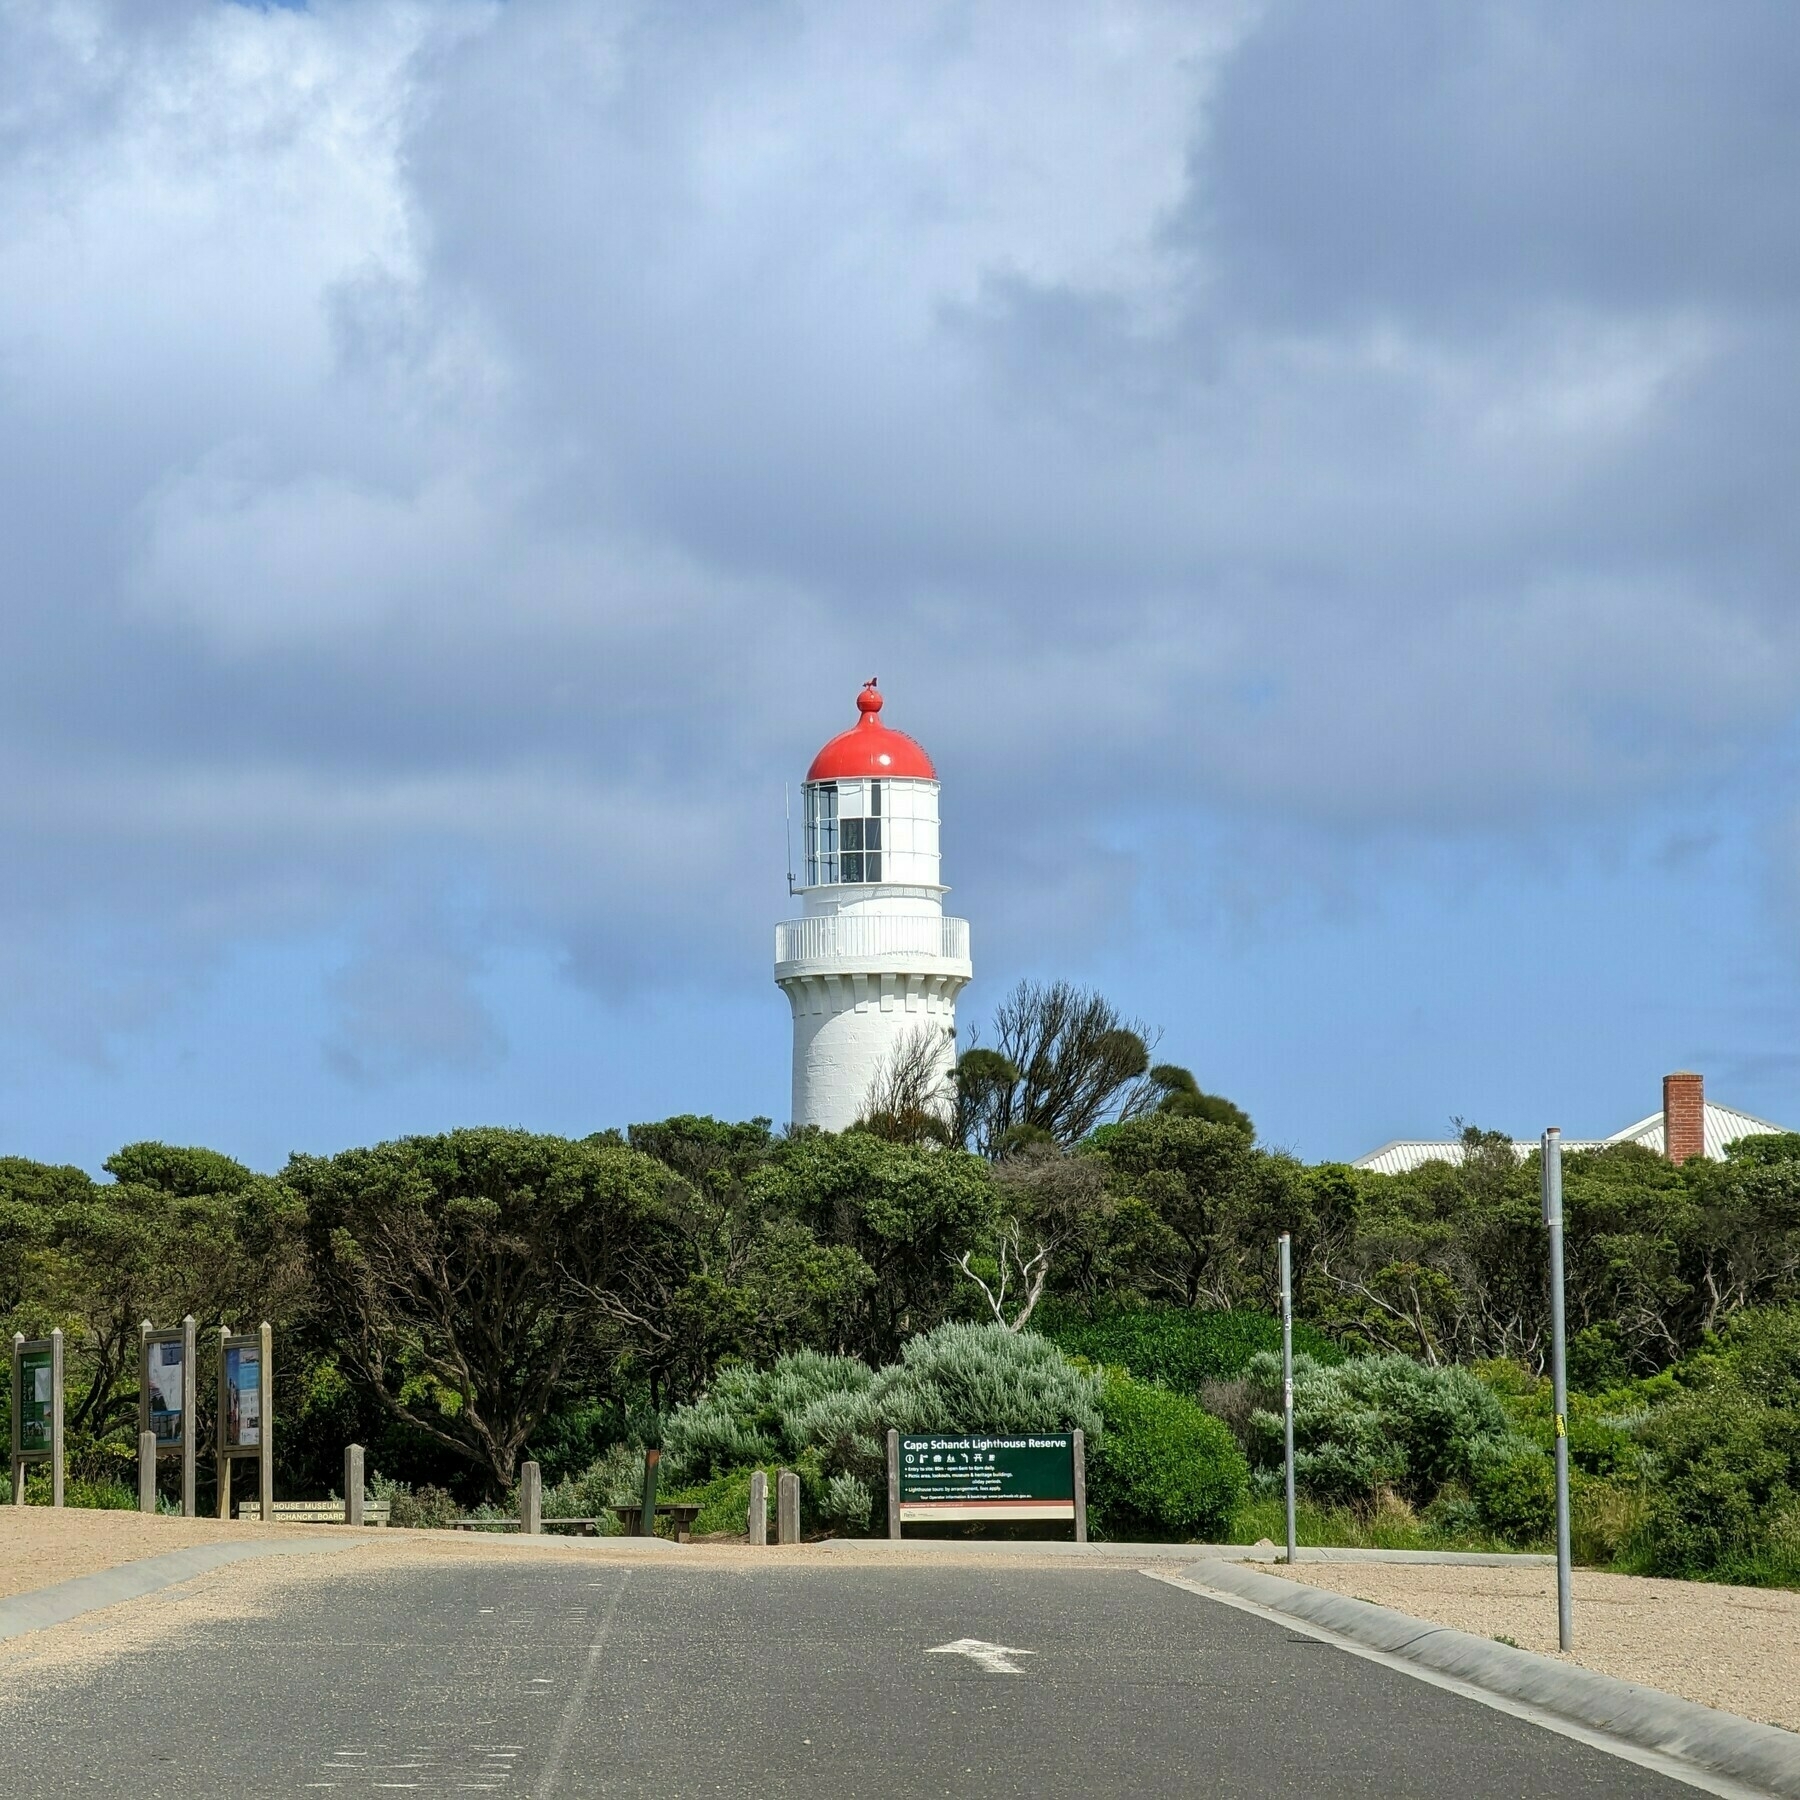 A road in a car park with an arrow pointing to a light-house behind some shrubs